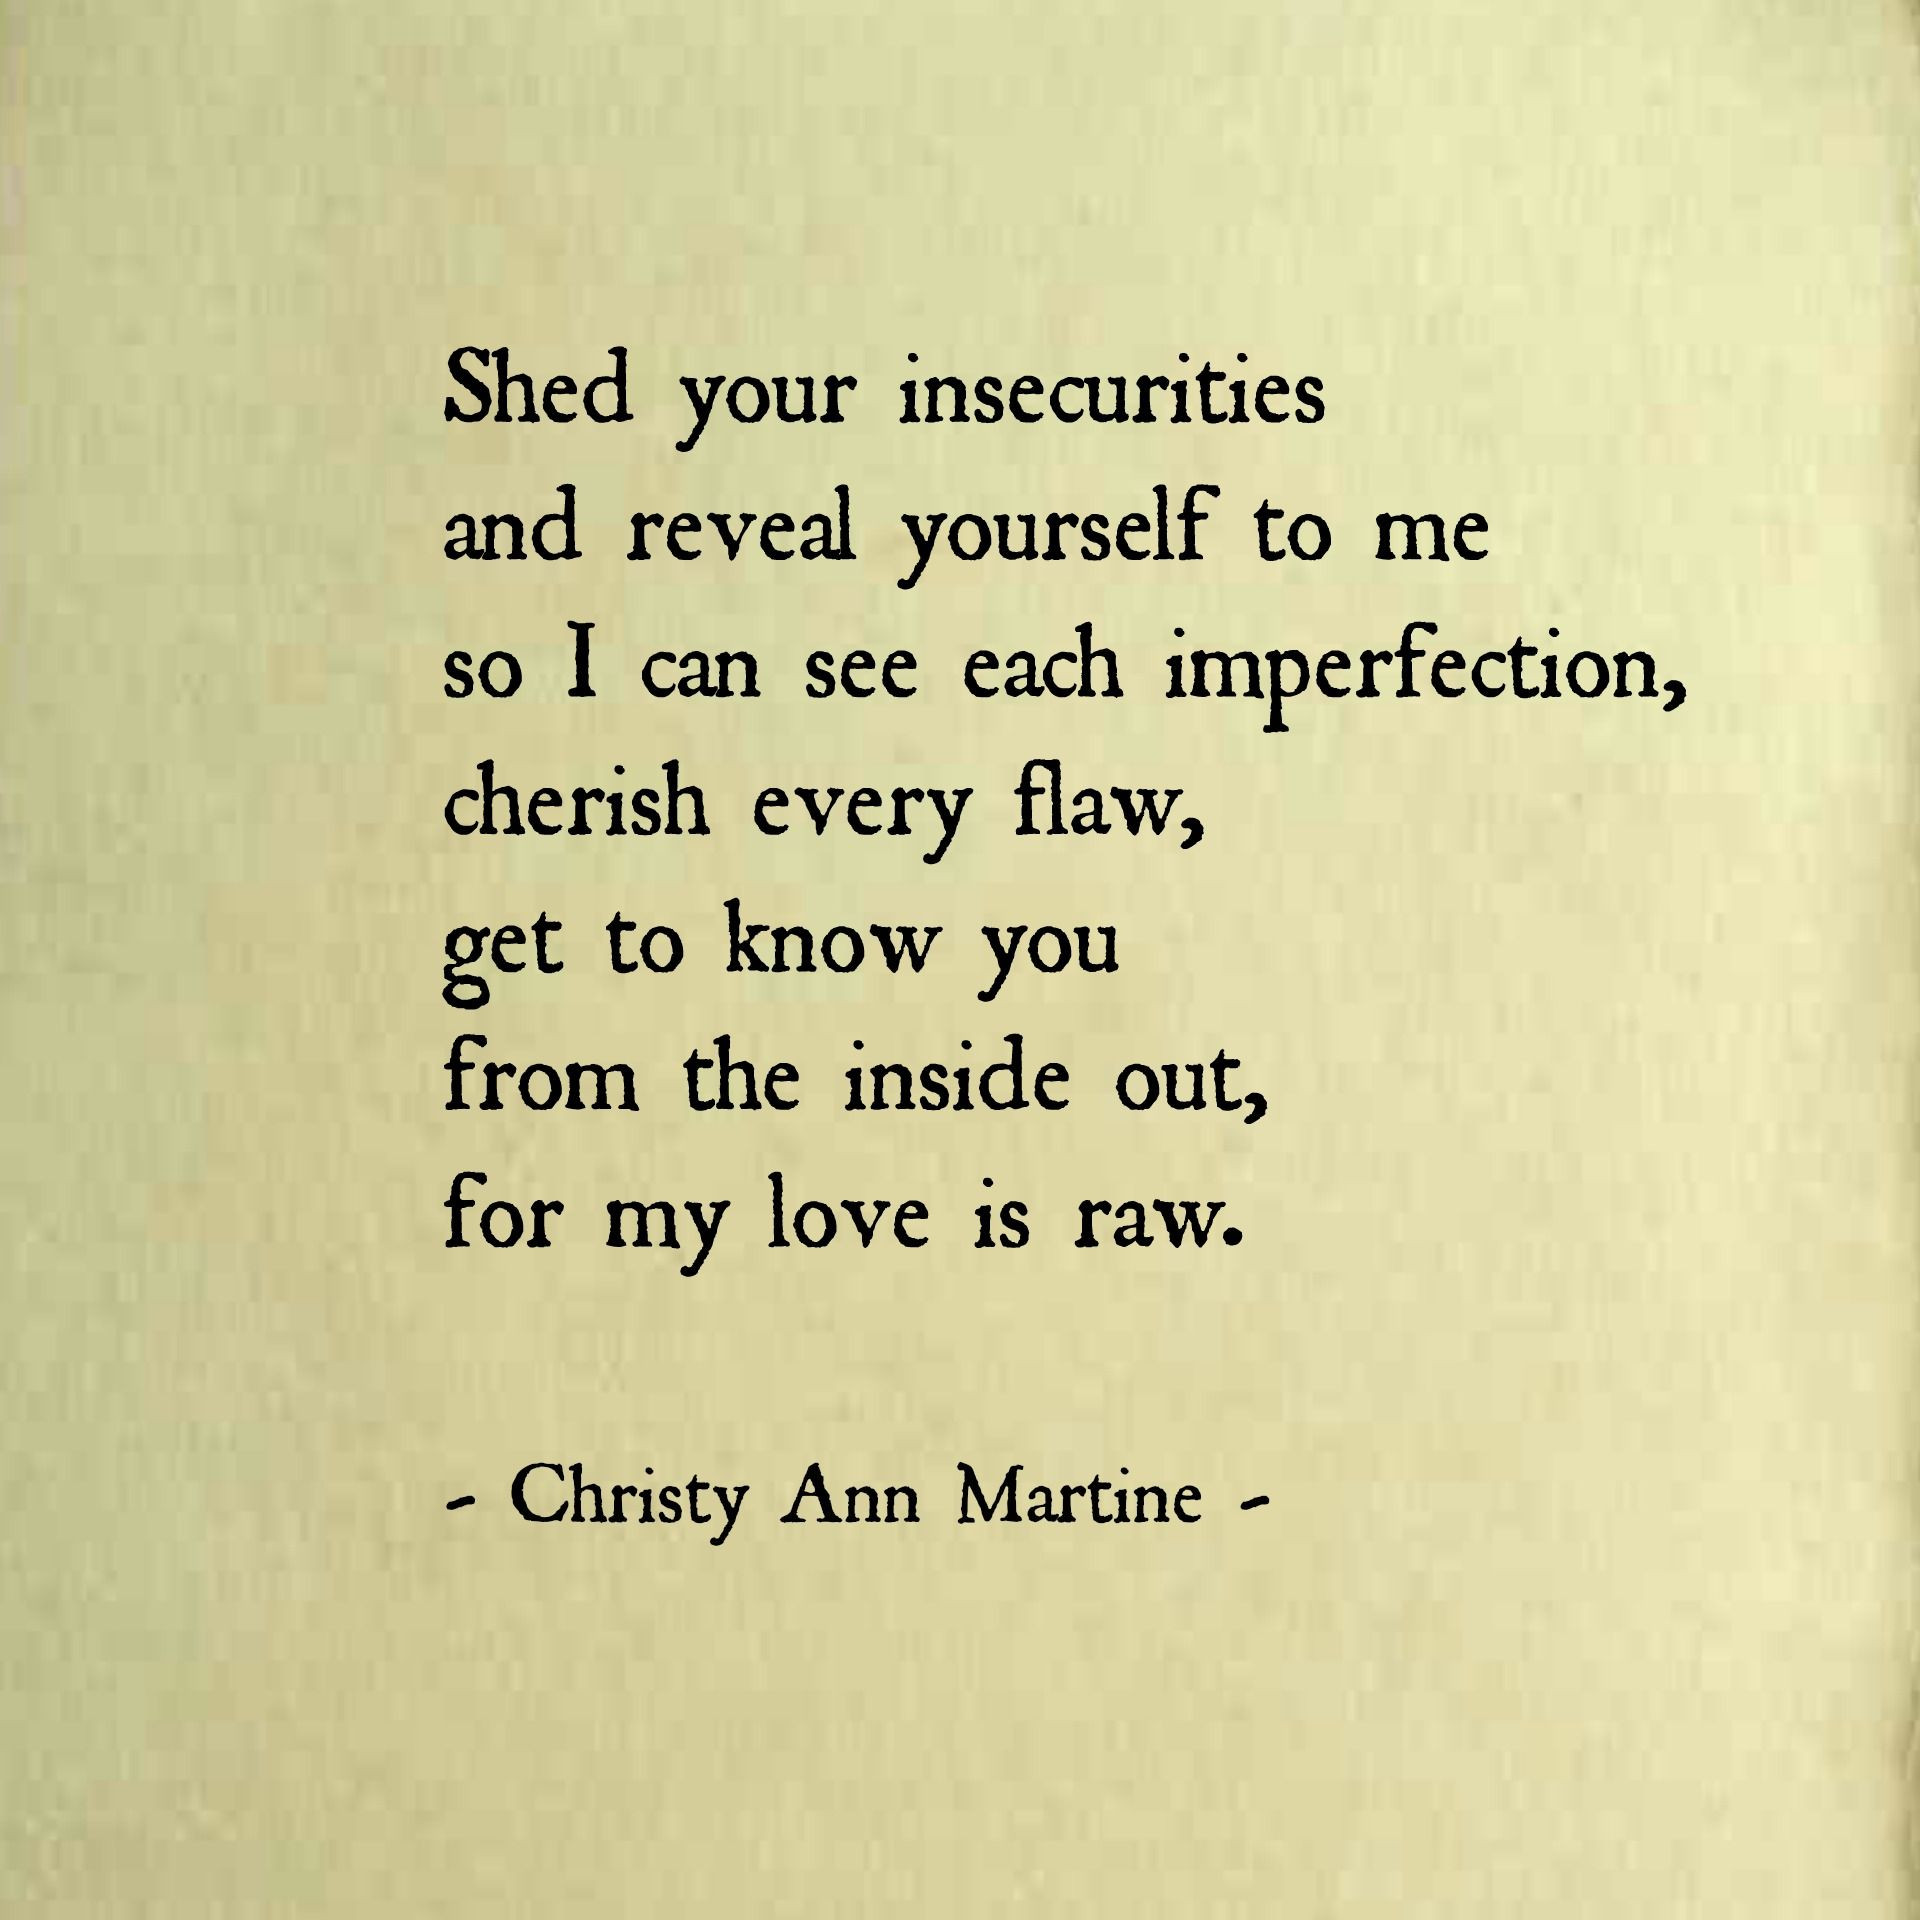 Quotes About Romanticism
 Love Poems Romantic Quotes Poetry by Christy Ann